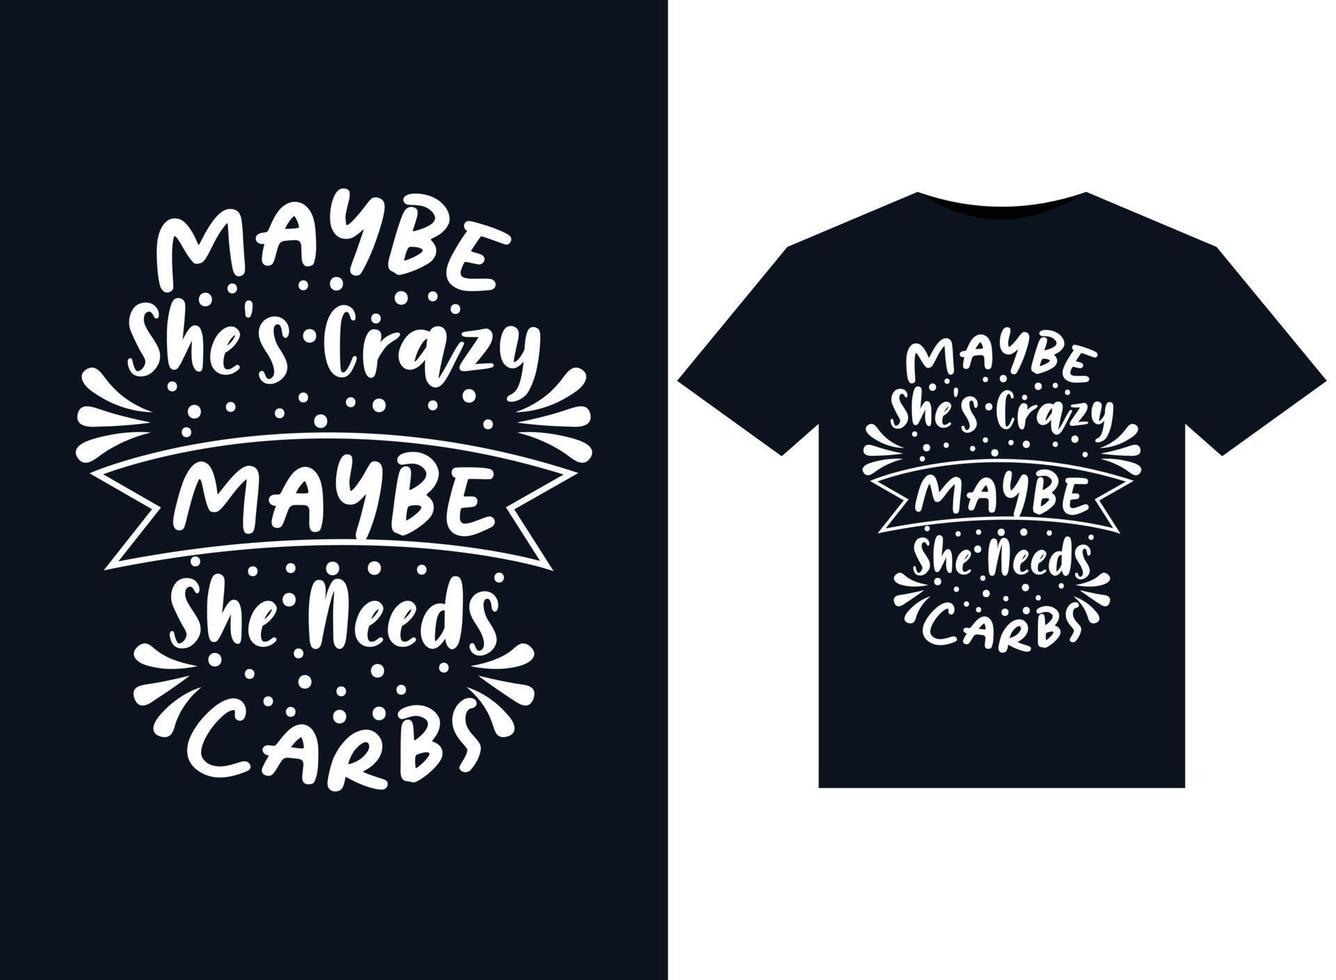 Maybe She's Crazy Maybe She Needs Carbs illustrations for print-ready T-Shirts design vector